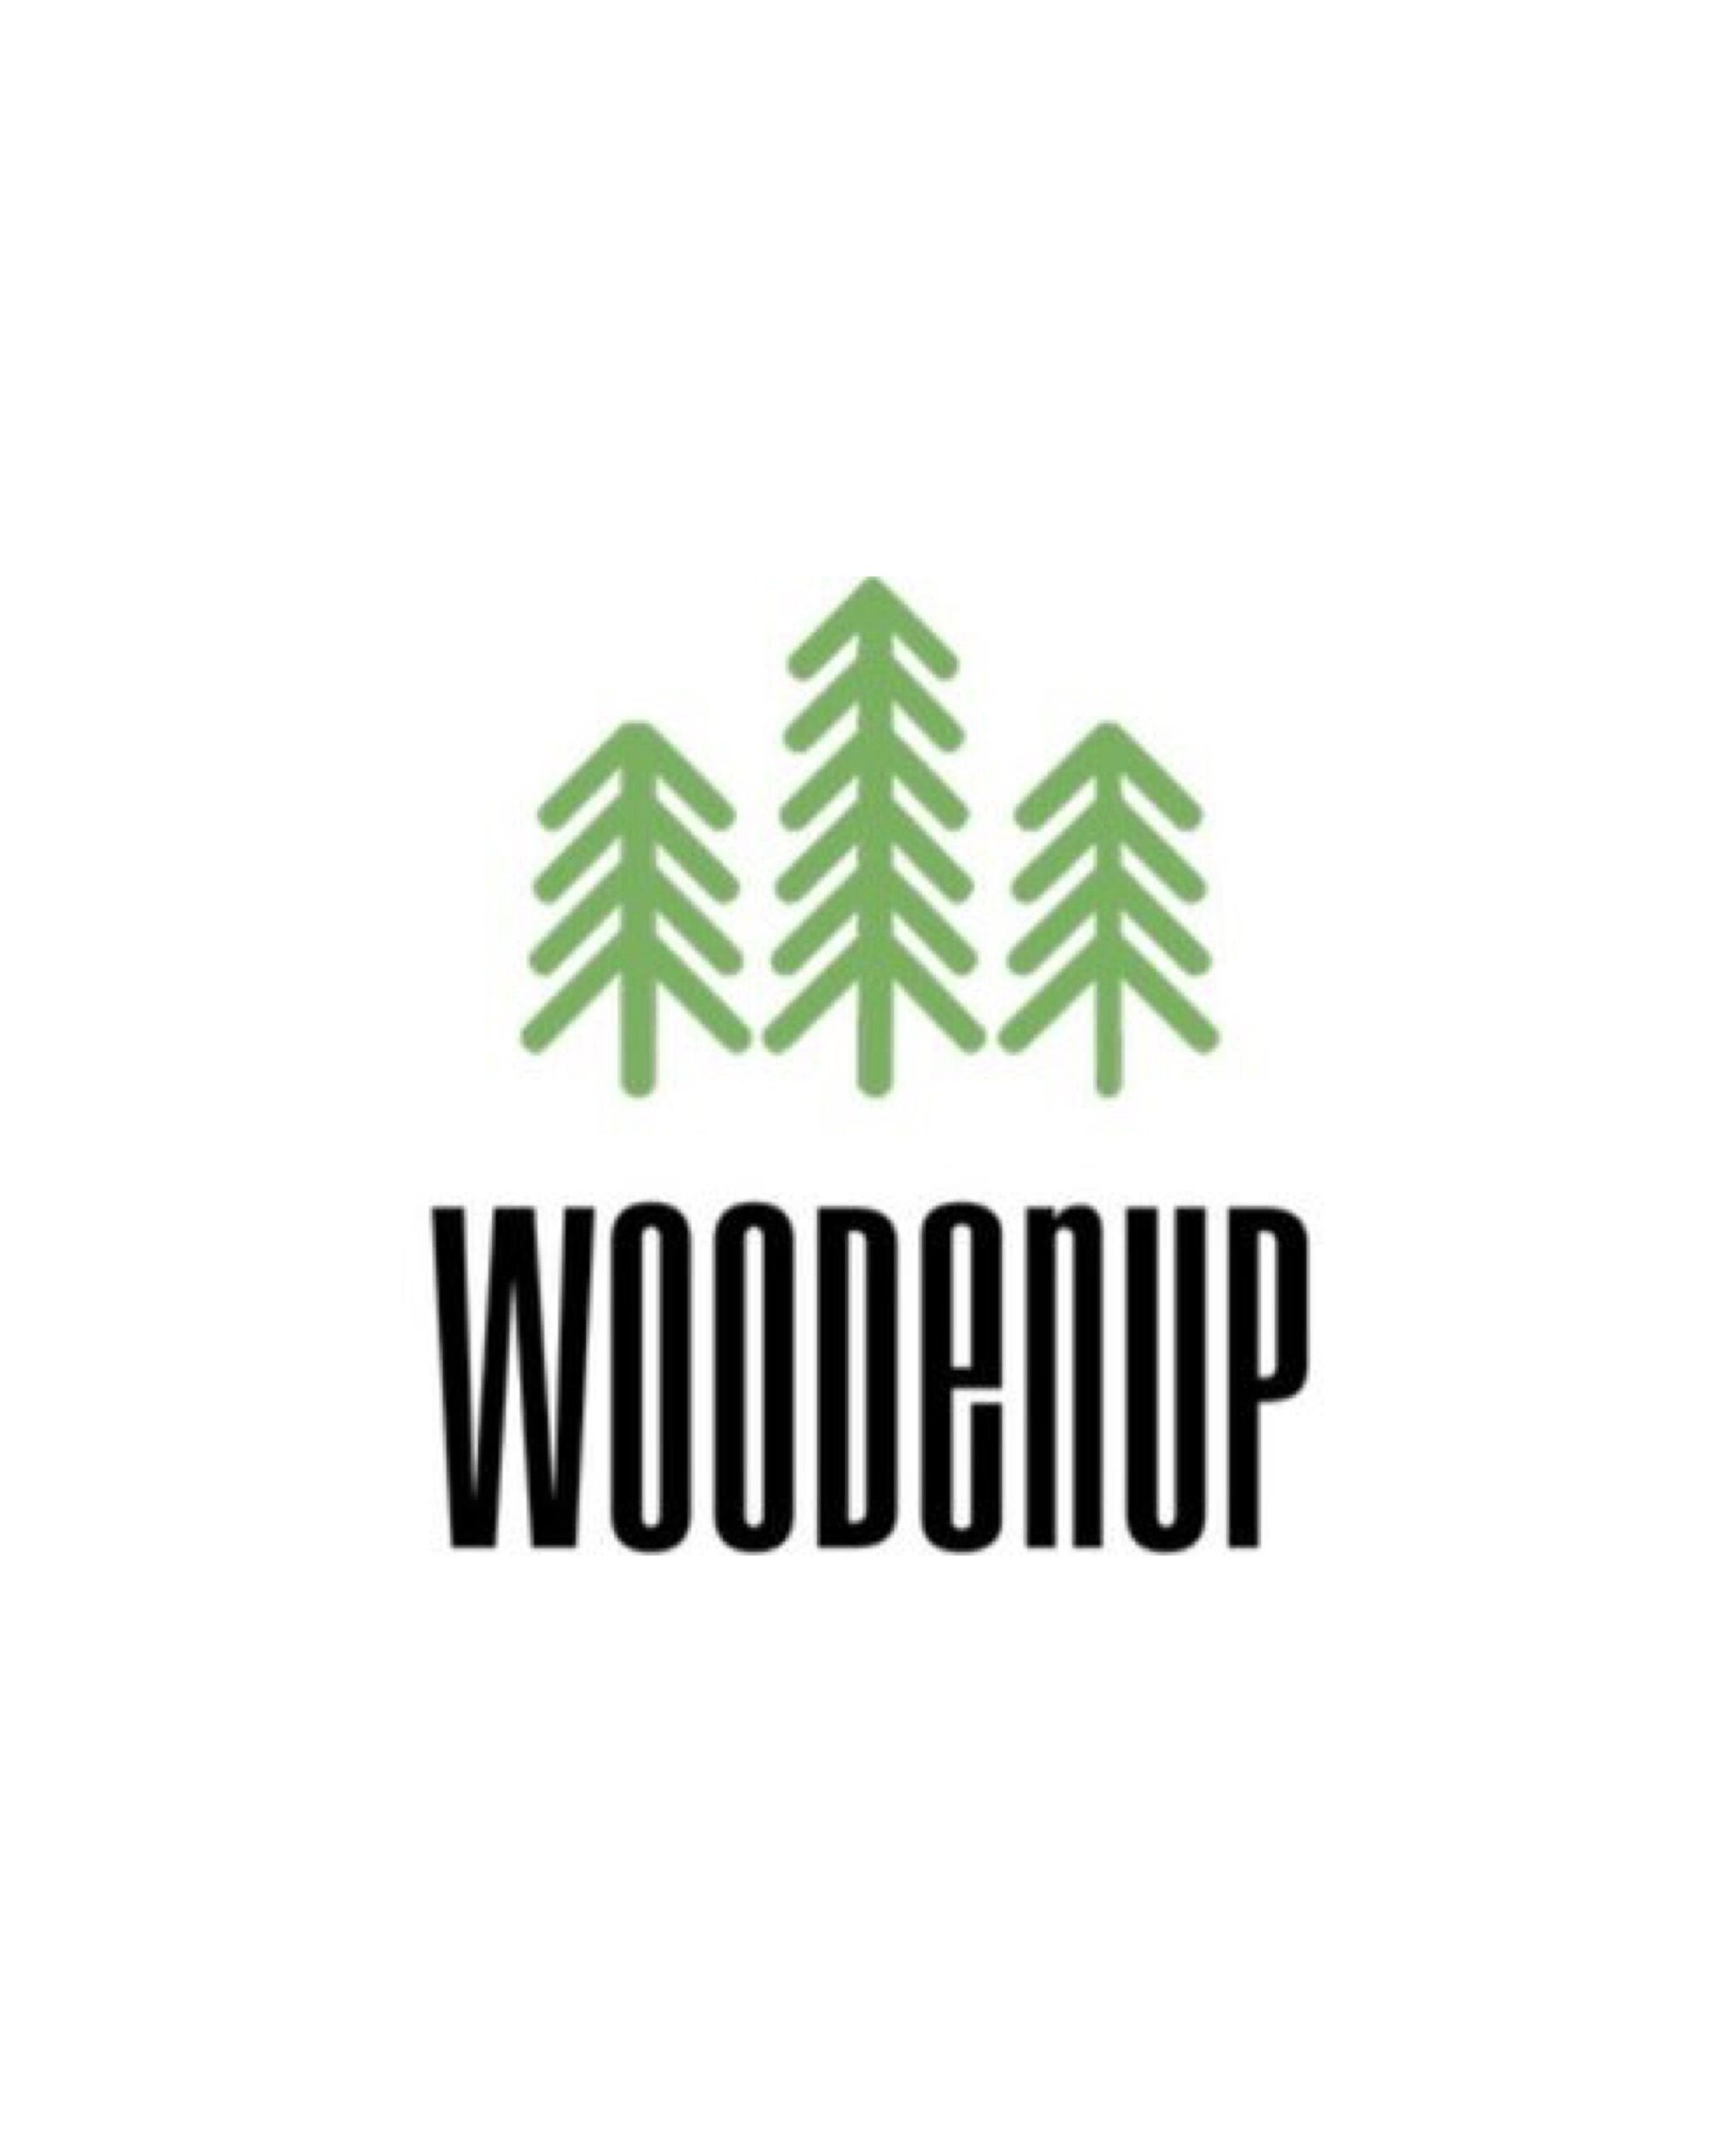 WoodenUP logo